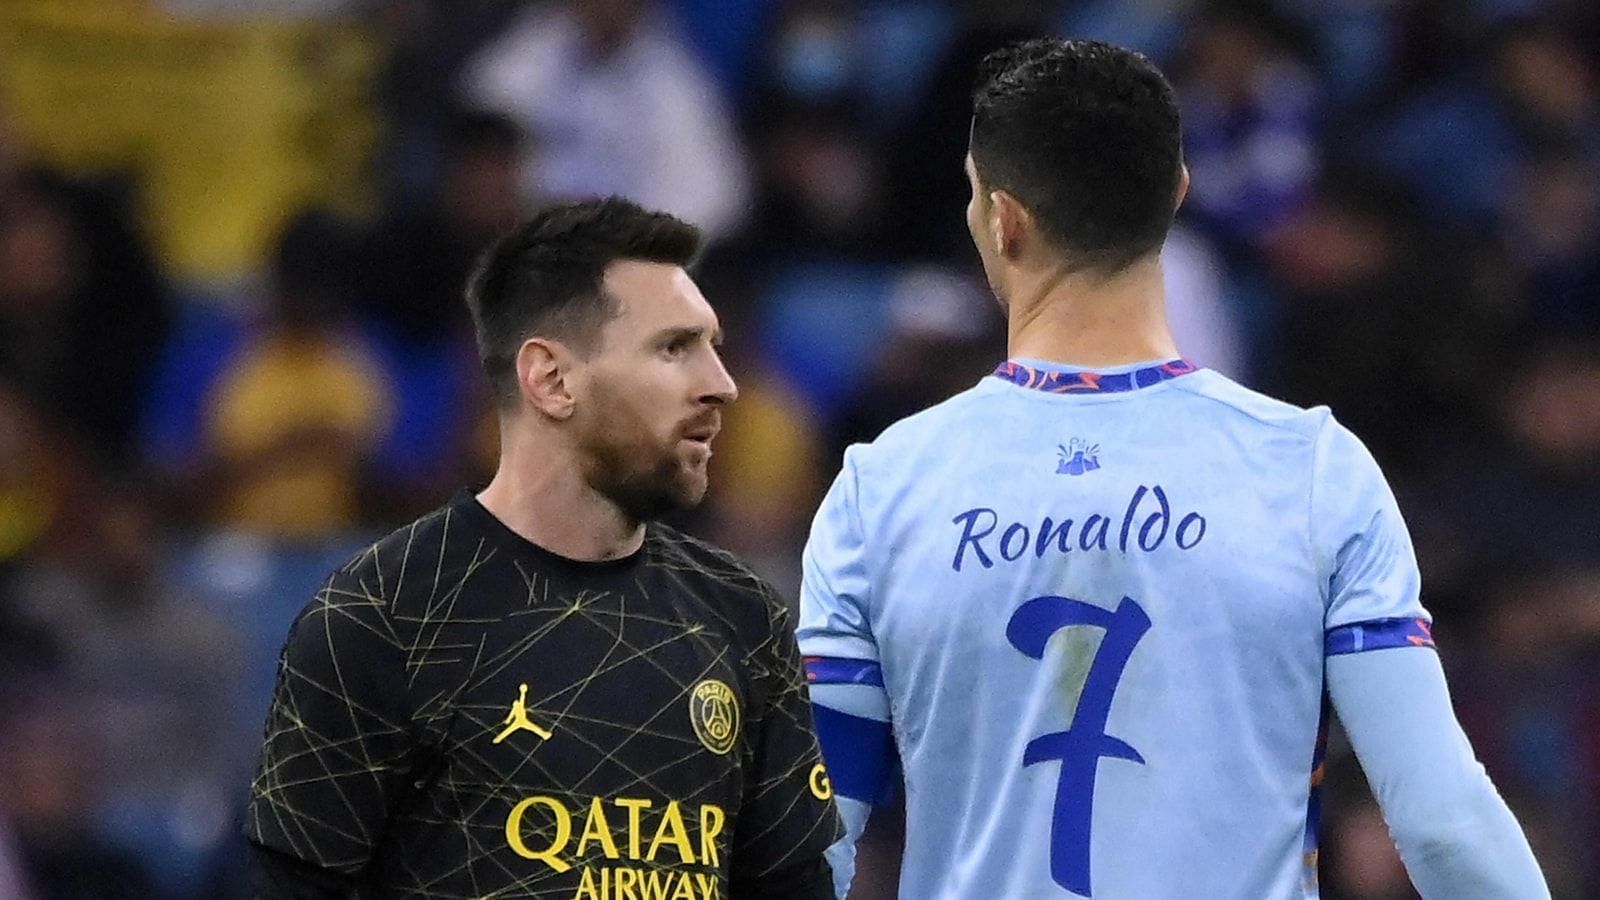 Cristiano Ronaldo and Lionel Messi could clash in another friendly.